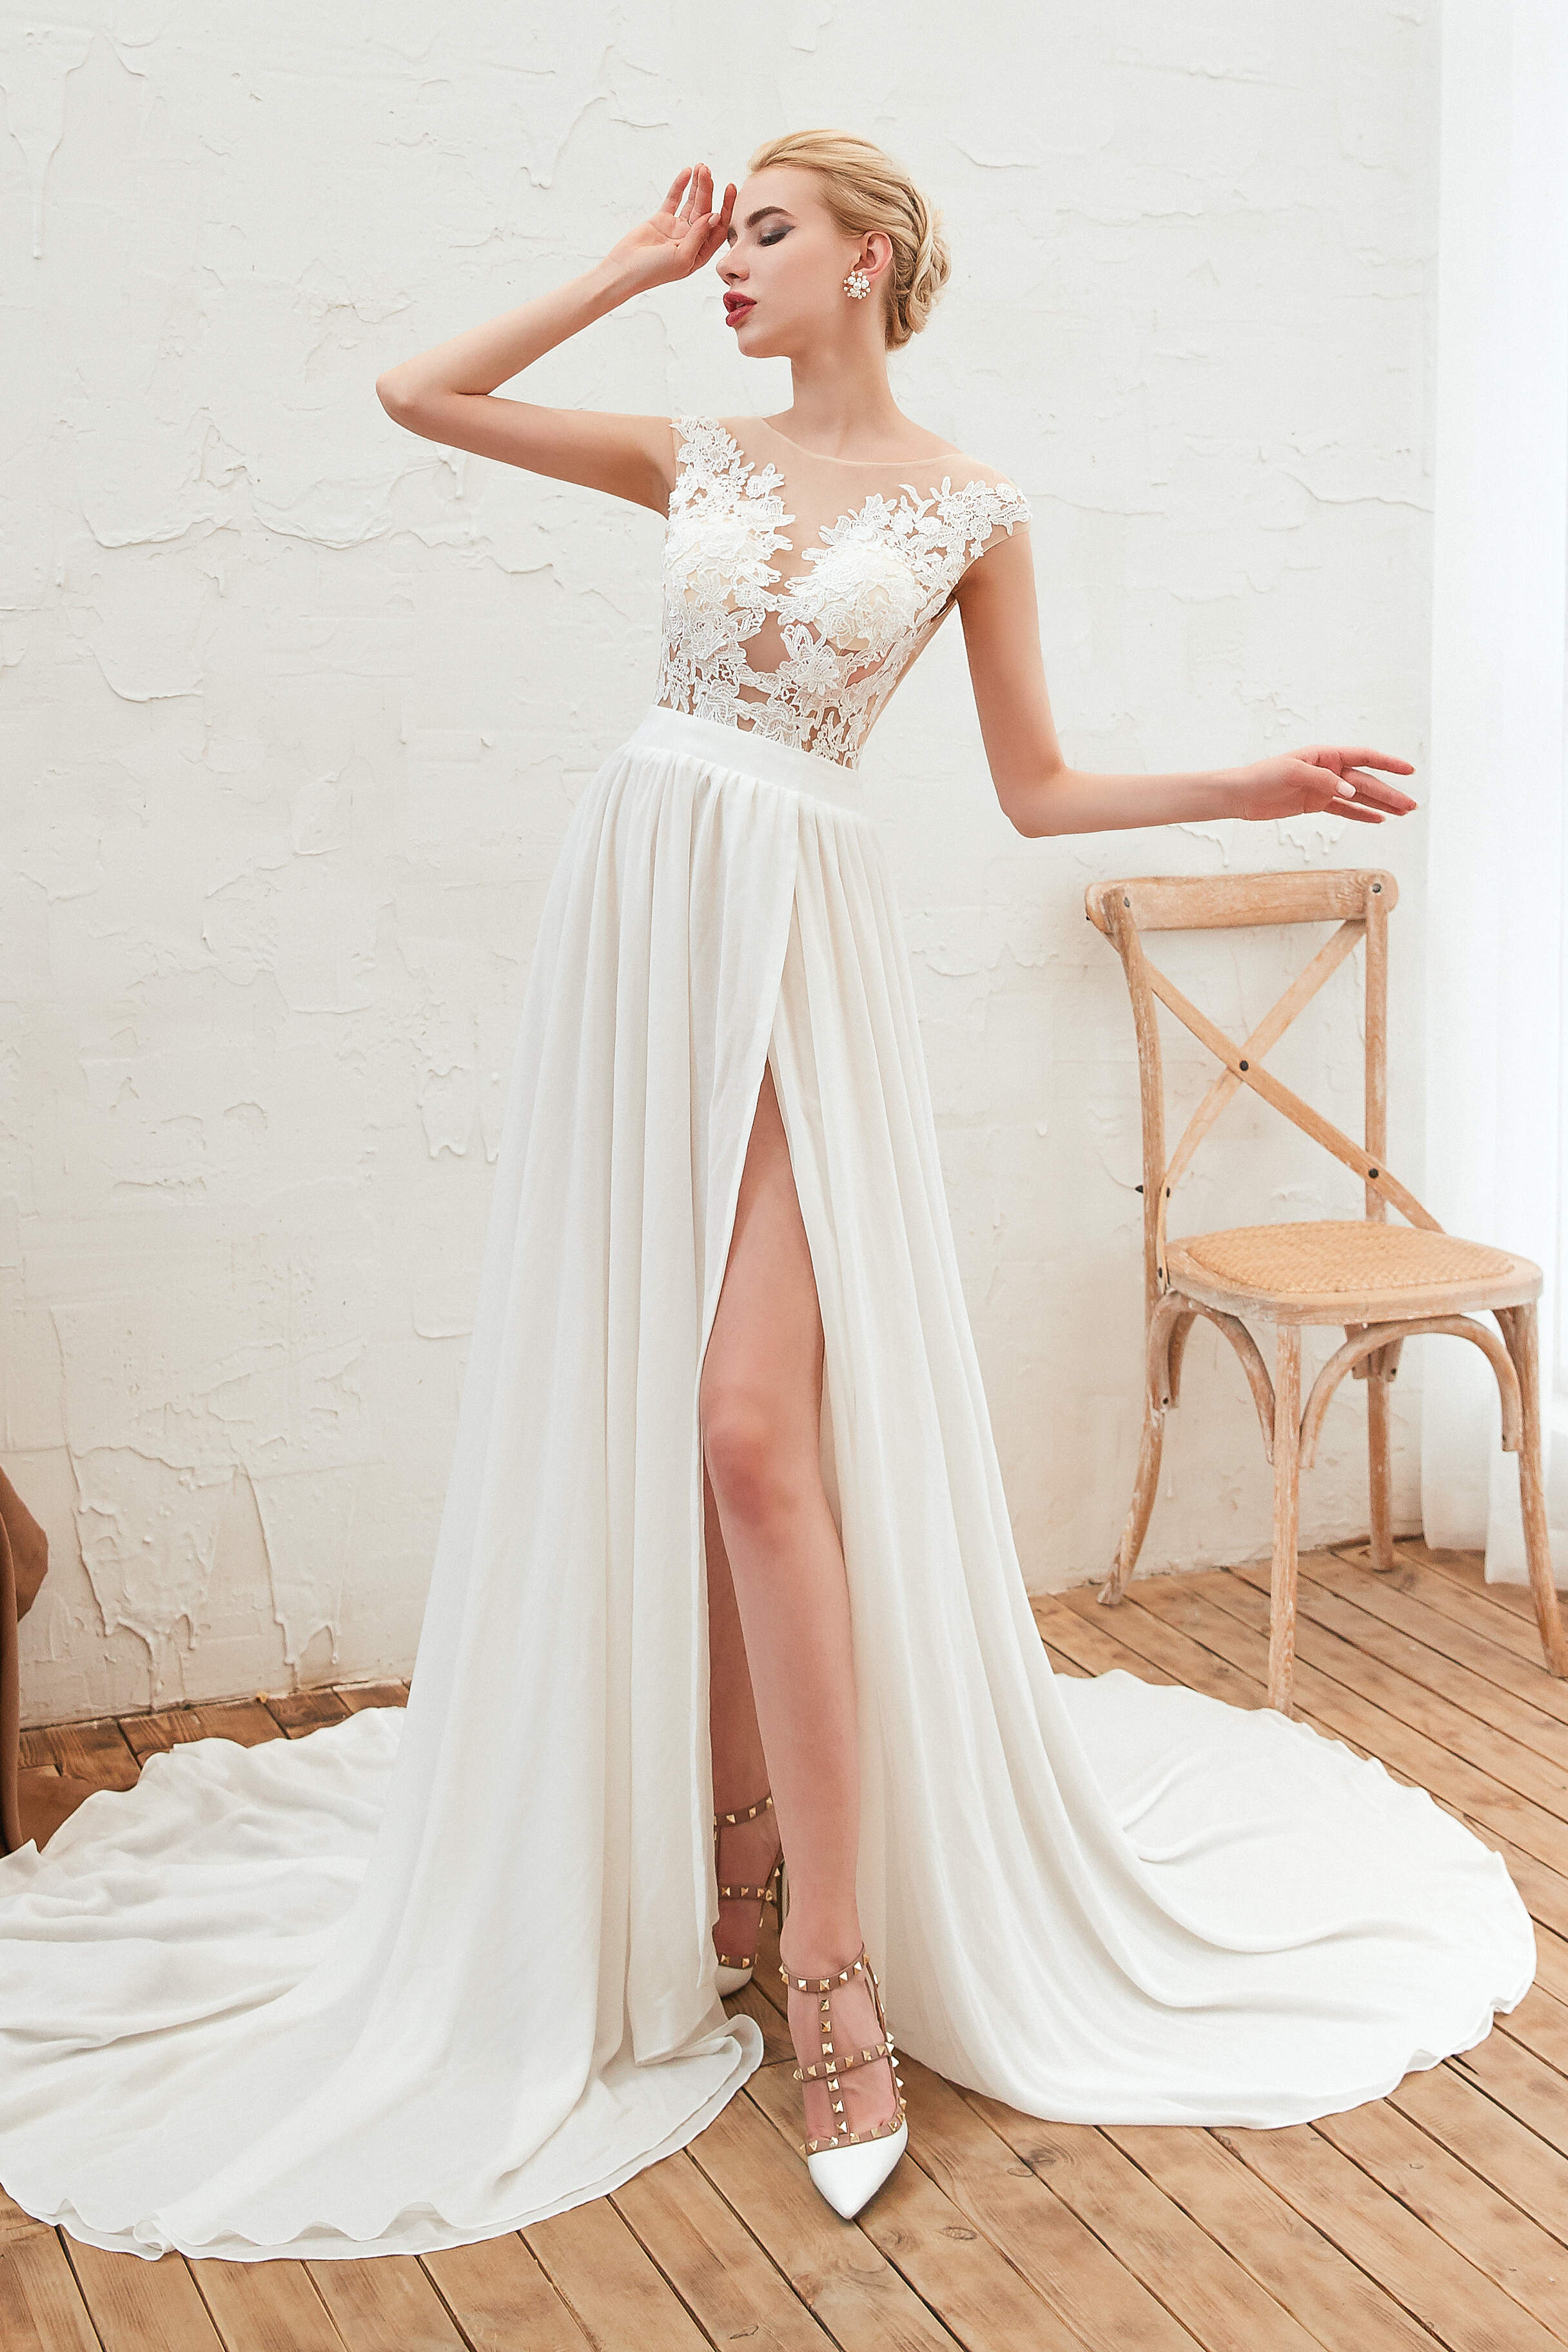 Wedding Dress Chic, Neck Lace Top White Wedding Dresses with Slit